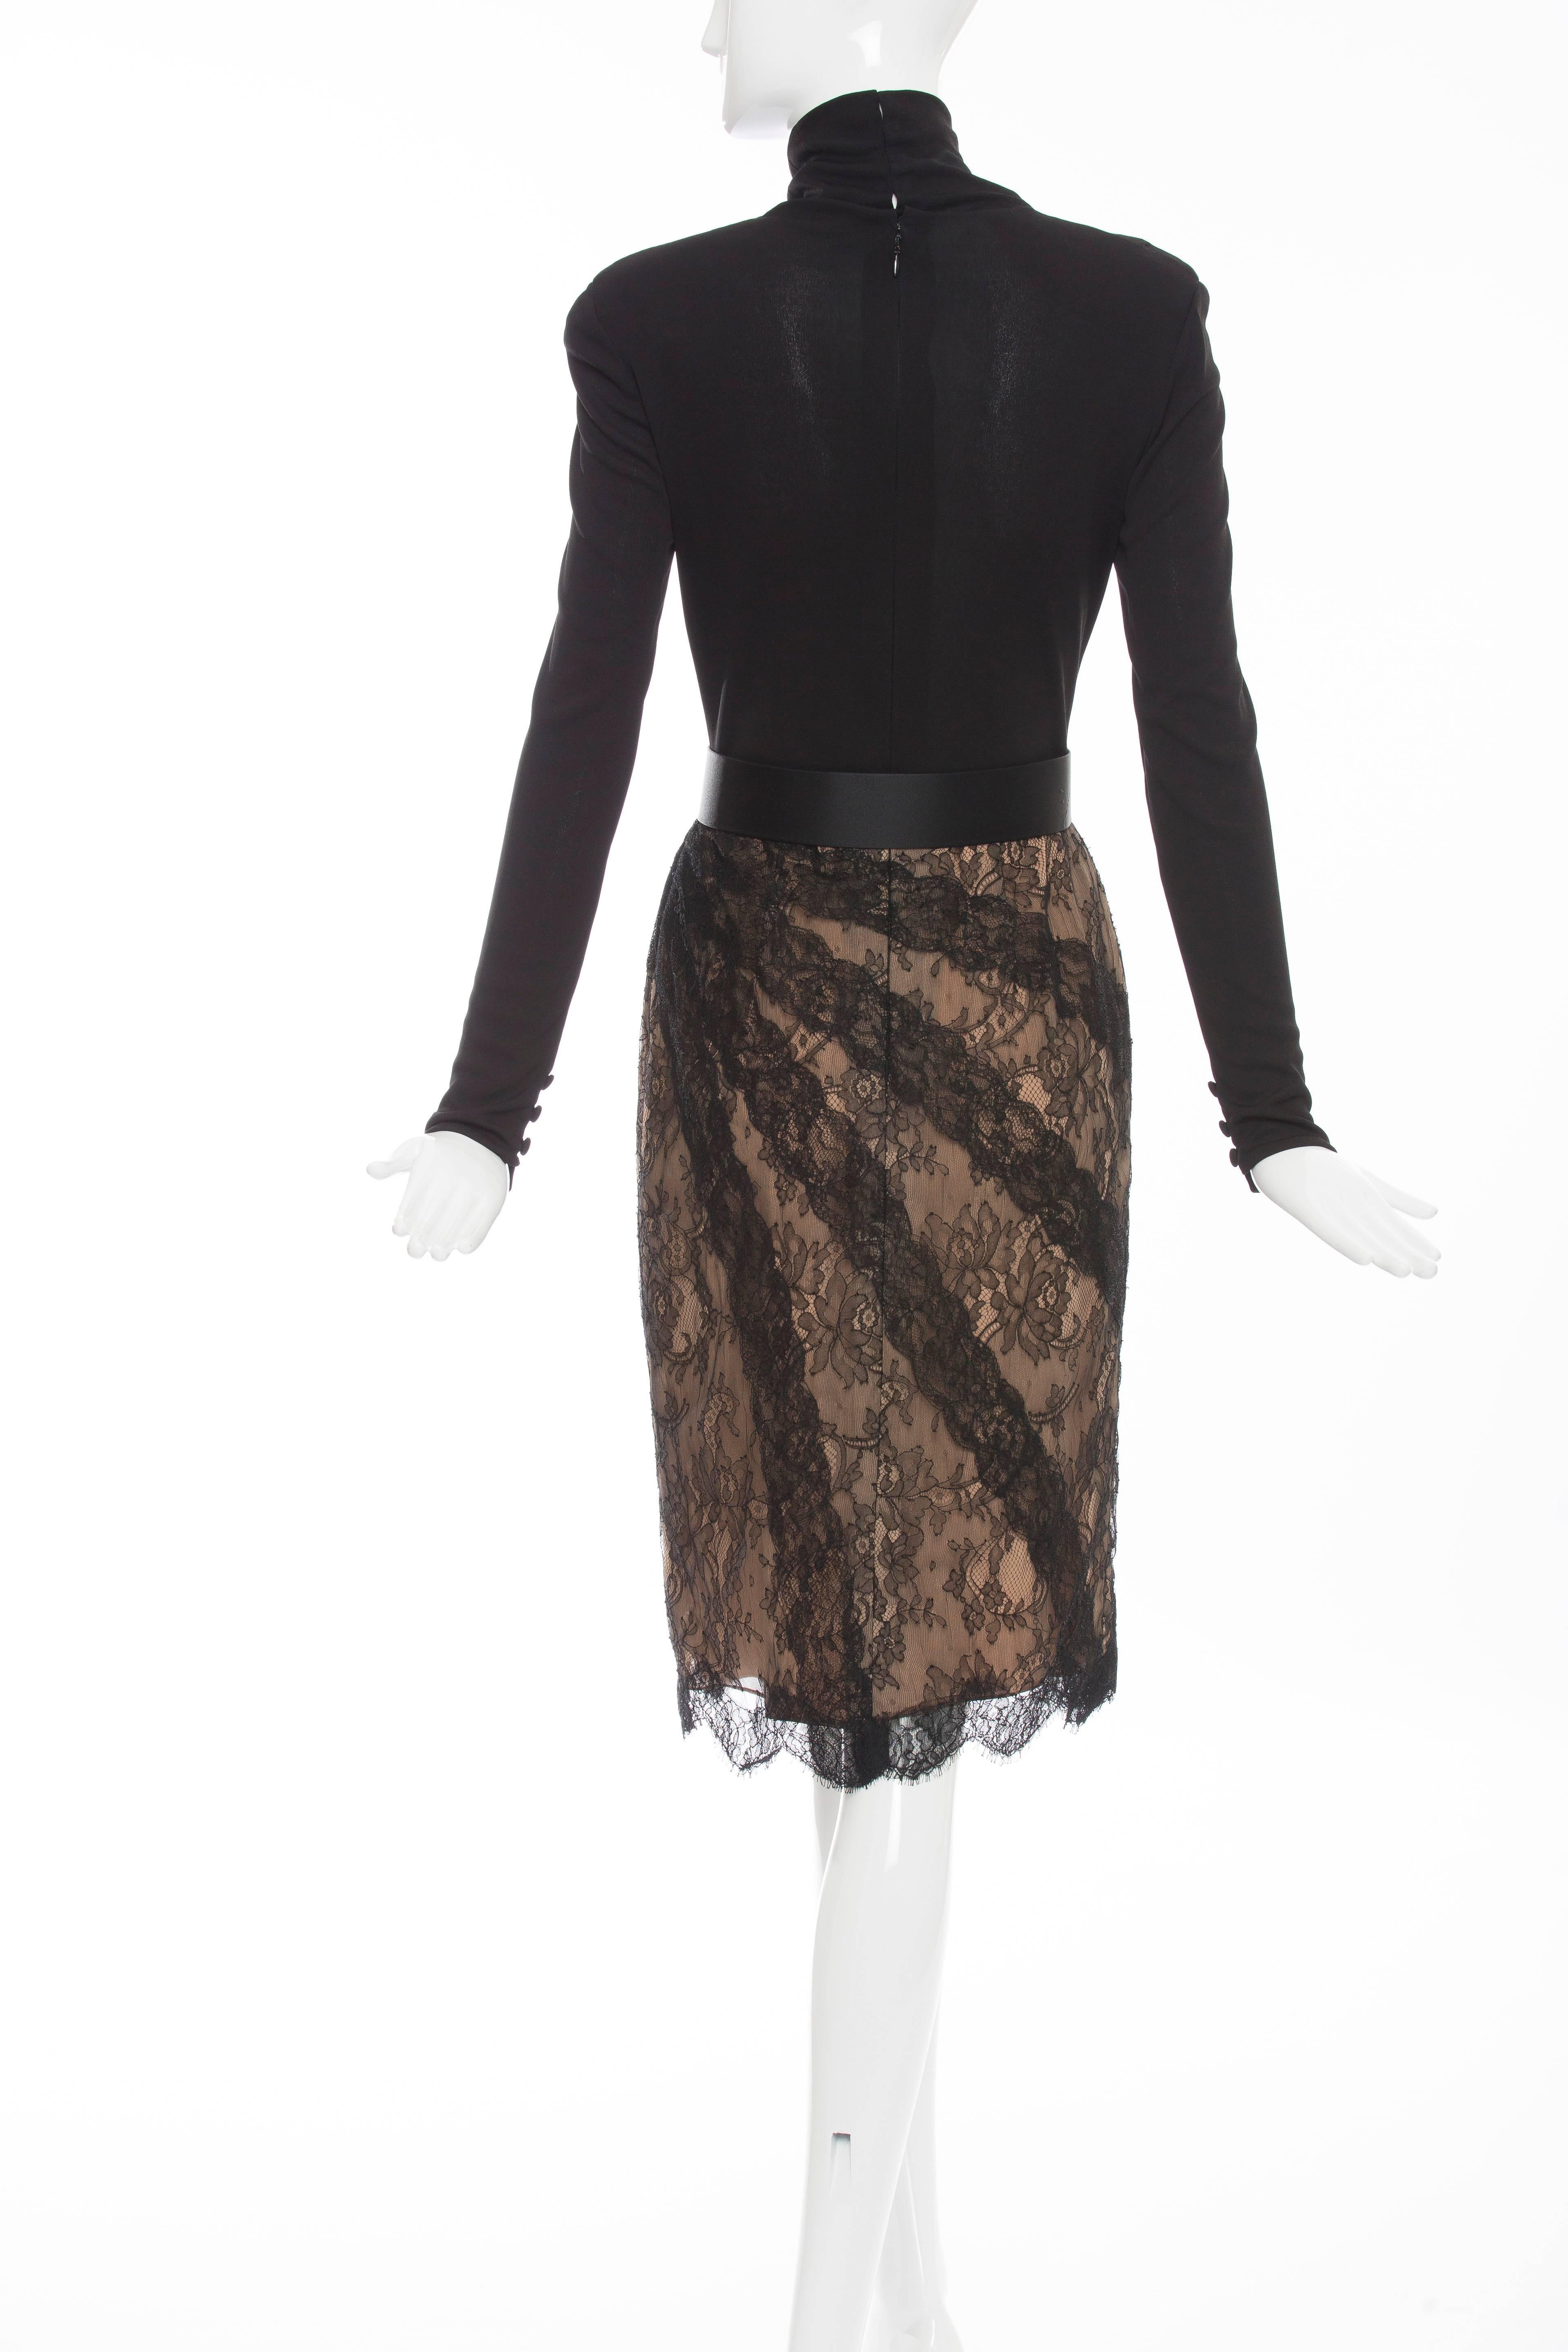 Bill Blass Black Imported Lace Evening Dress, Circa 1980s In Excellent Condition For Sale In Cincinnati, OH